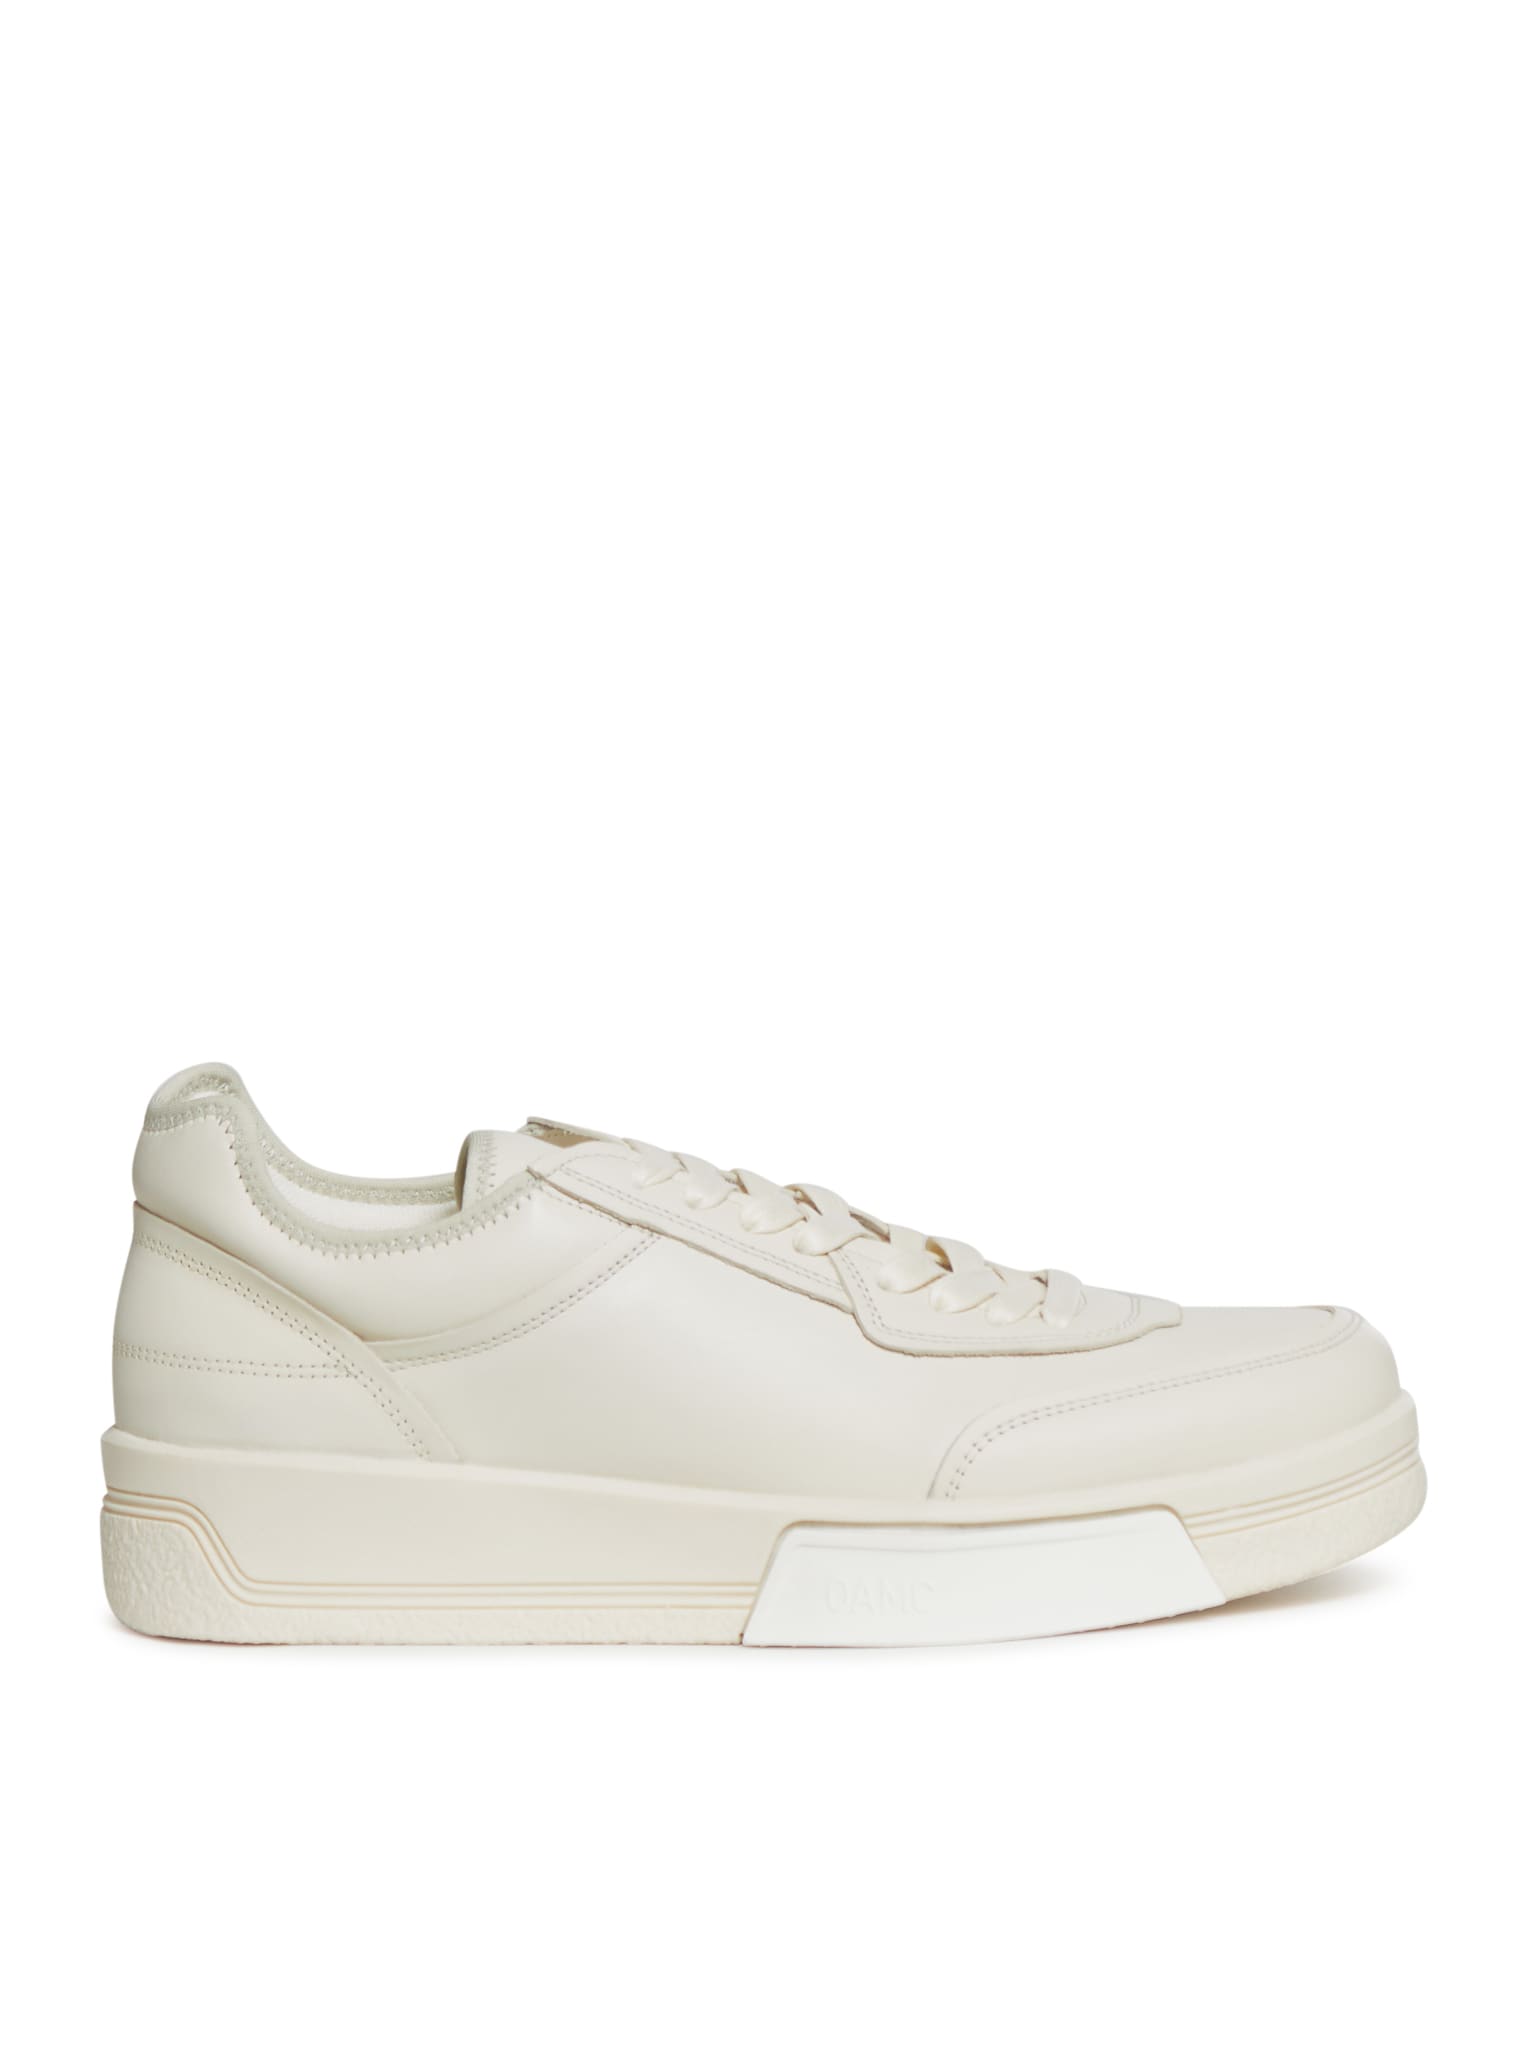 Oamc Cosmos Cupsole In Offwhite